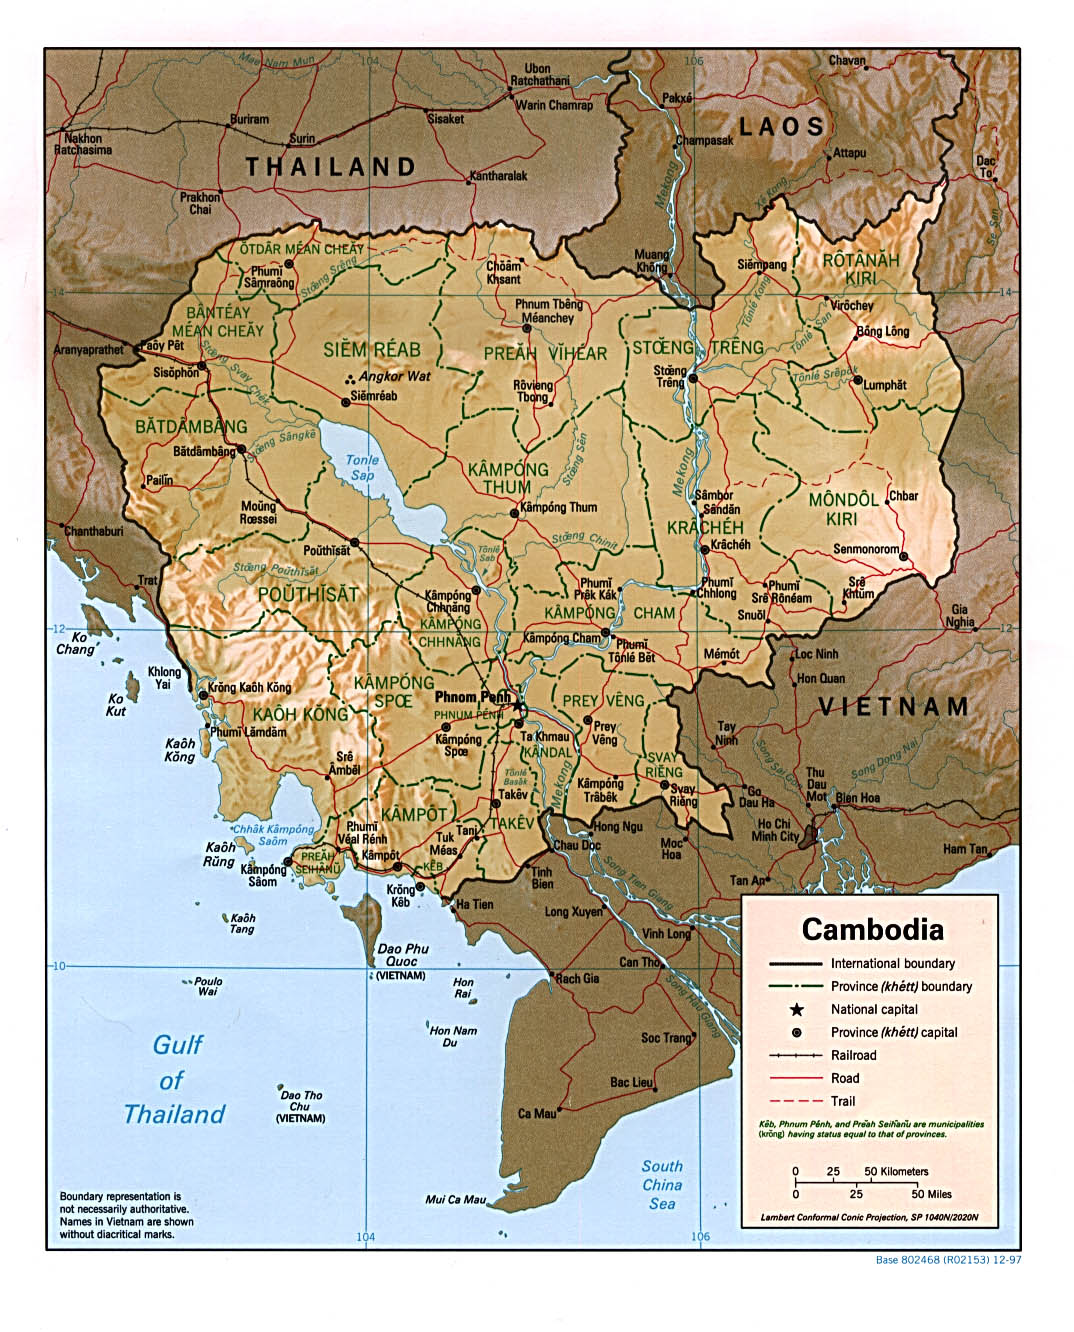 Map Of Cambodia Cambodia [Shaded Relief Map] 1997 (332K) 